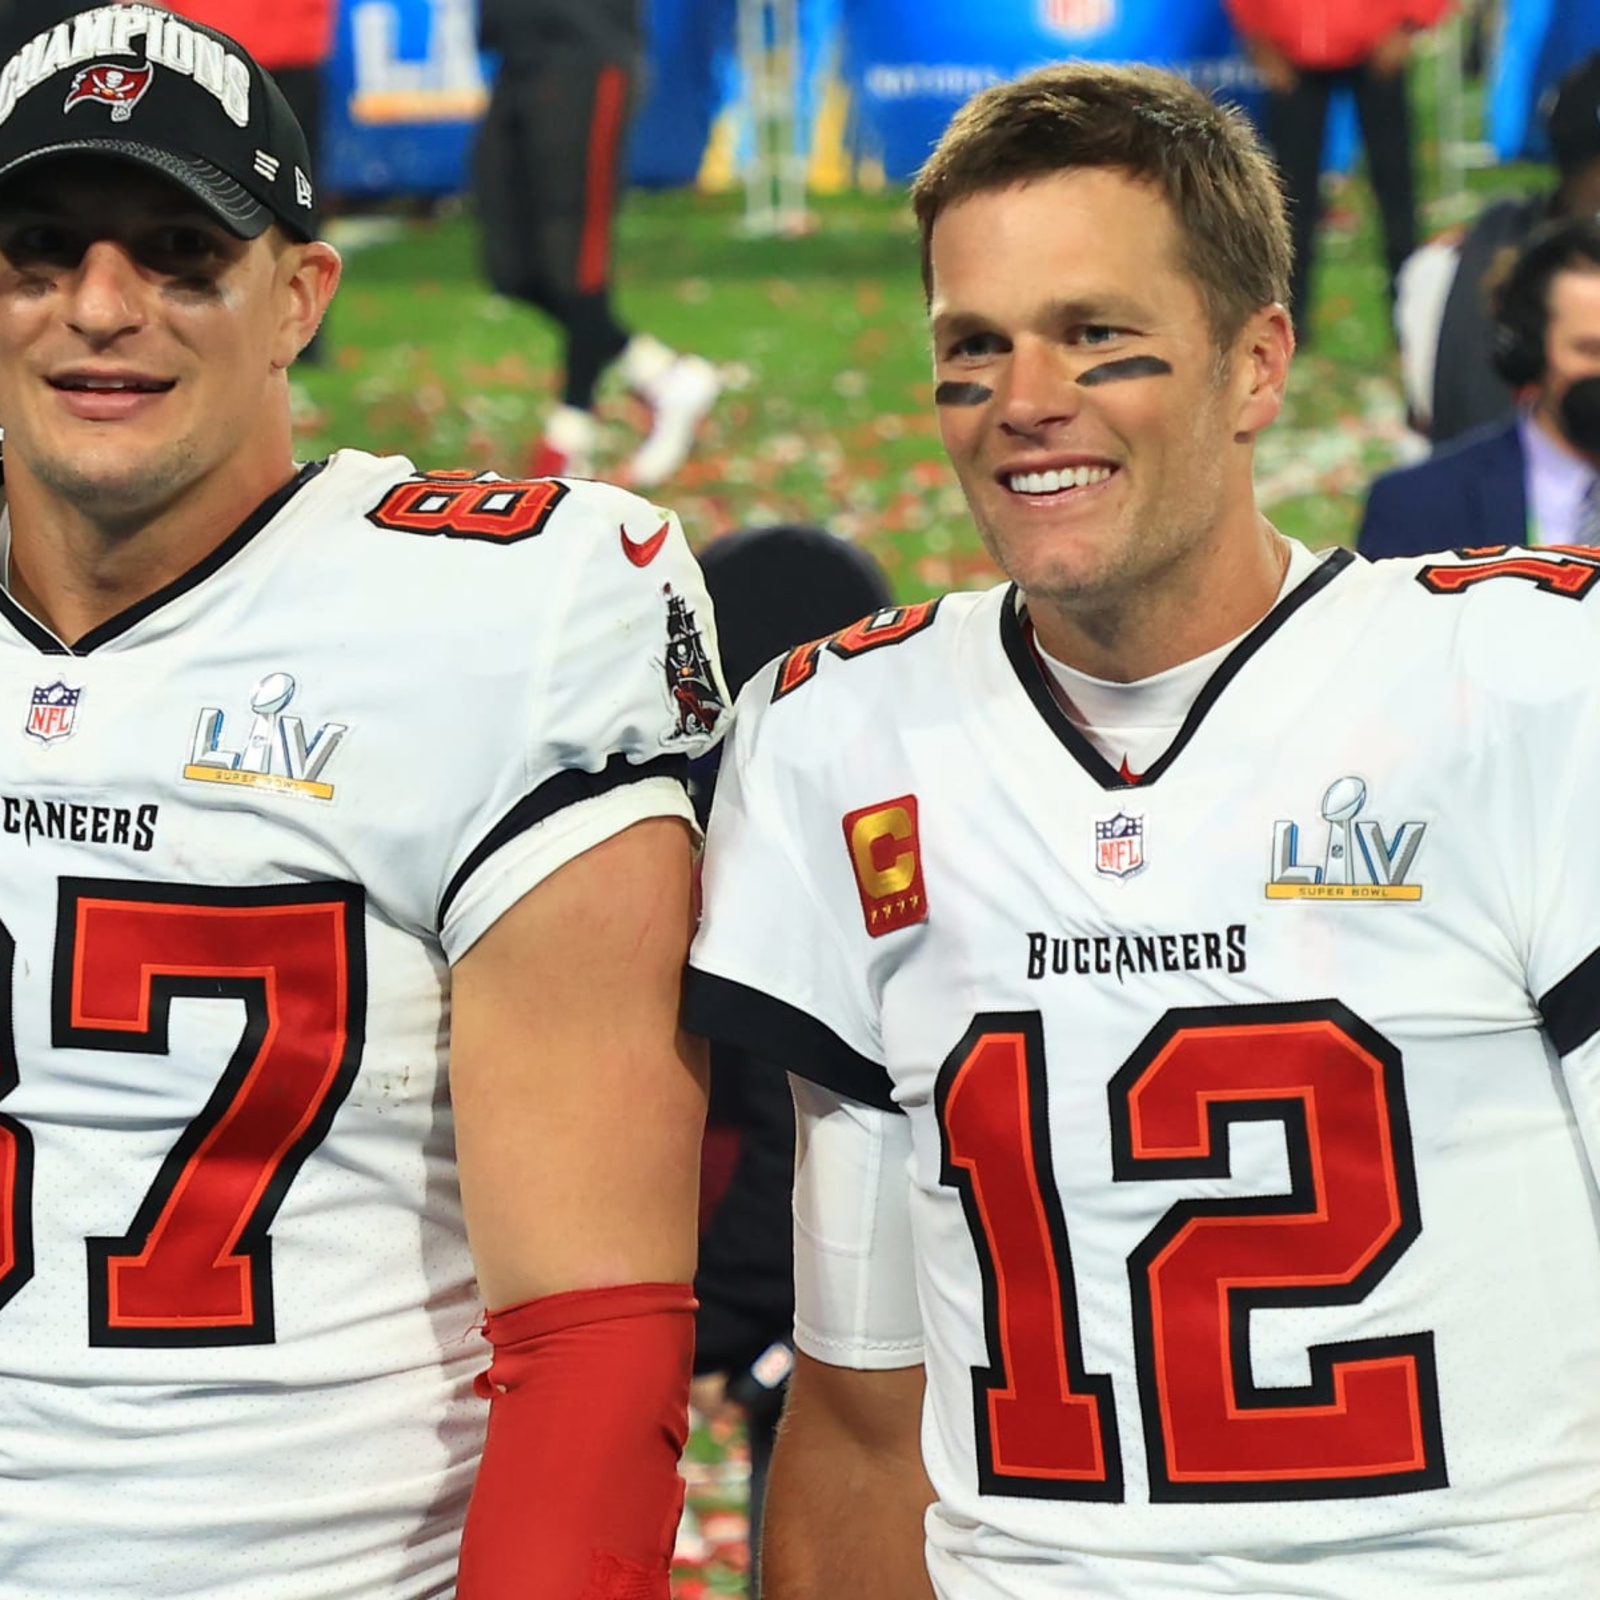 Super Bowl 2021 winners & losers: Tom Brady gets help from Gronk